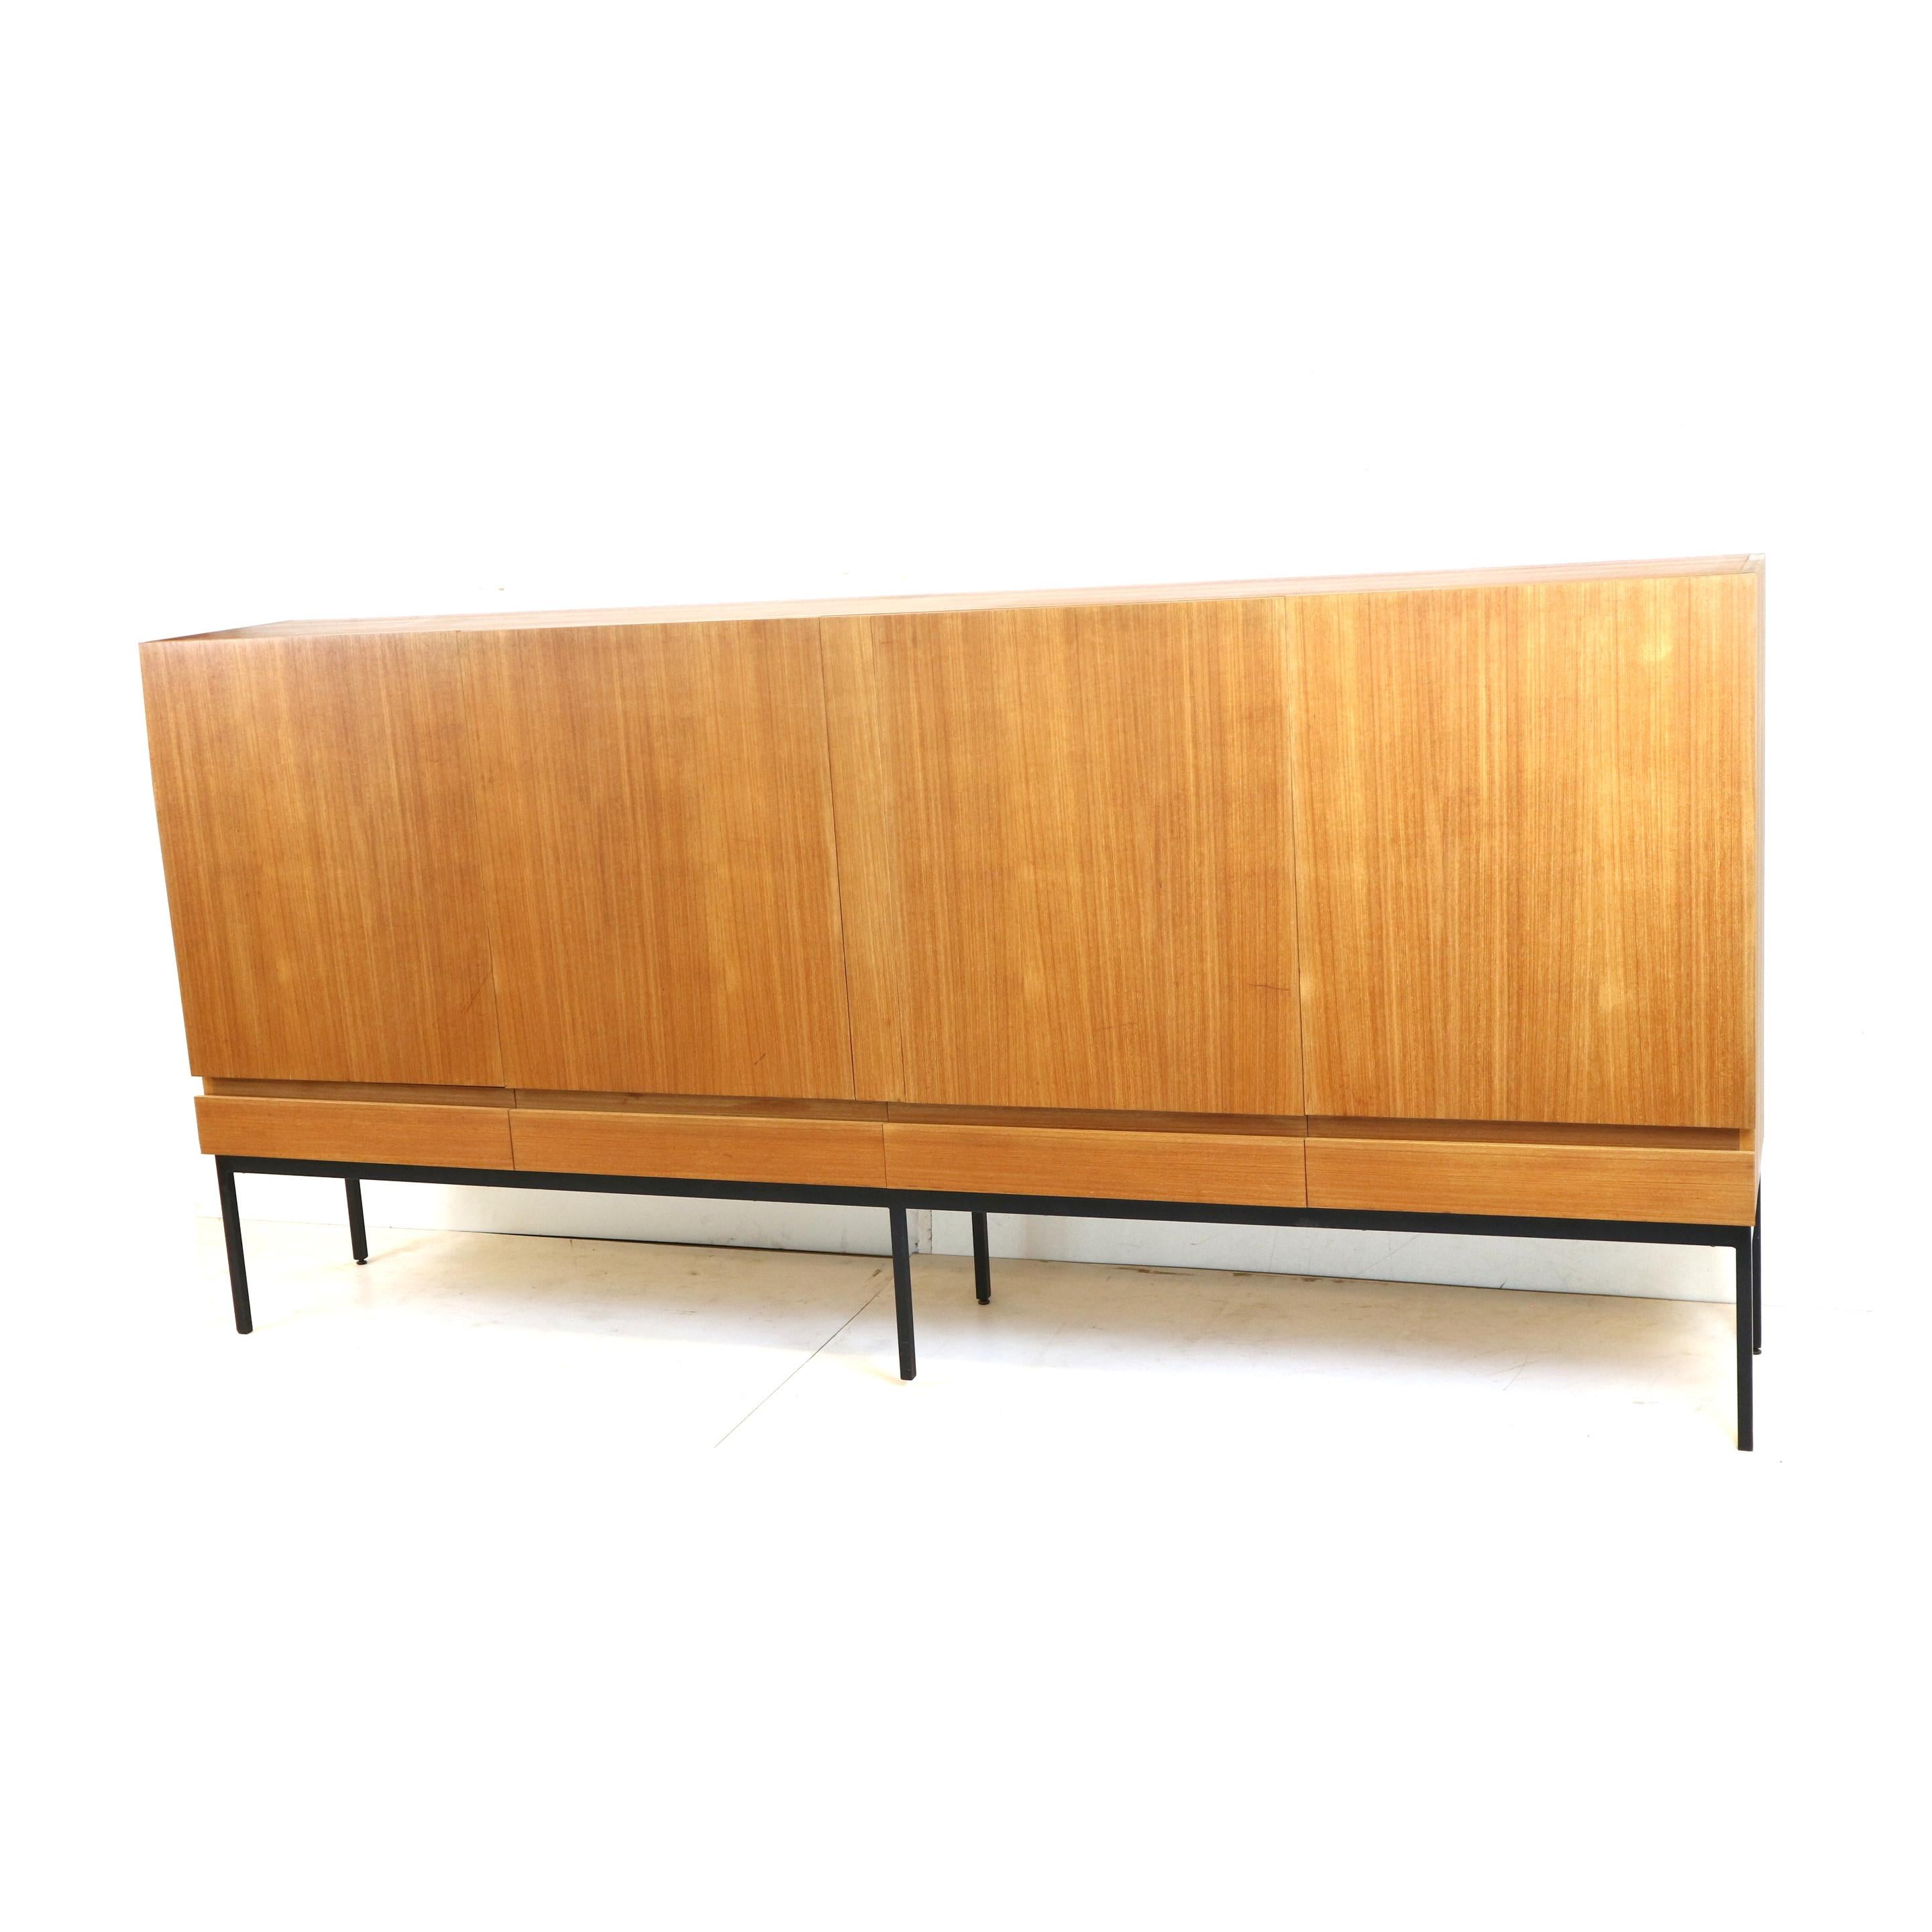 Vintage sideboard / highboard Dieter Waeckerlin B60 for Behr from the 1960s.

Minimalist design piece made of teak wood with polished frame.
The B60 was designed by Dieter Waeckerlin in 1958 and manufactured by Behr Möbel in 1962

Dieter Waeckerlin